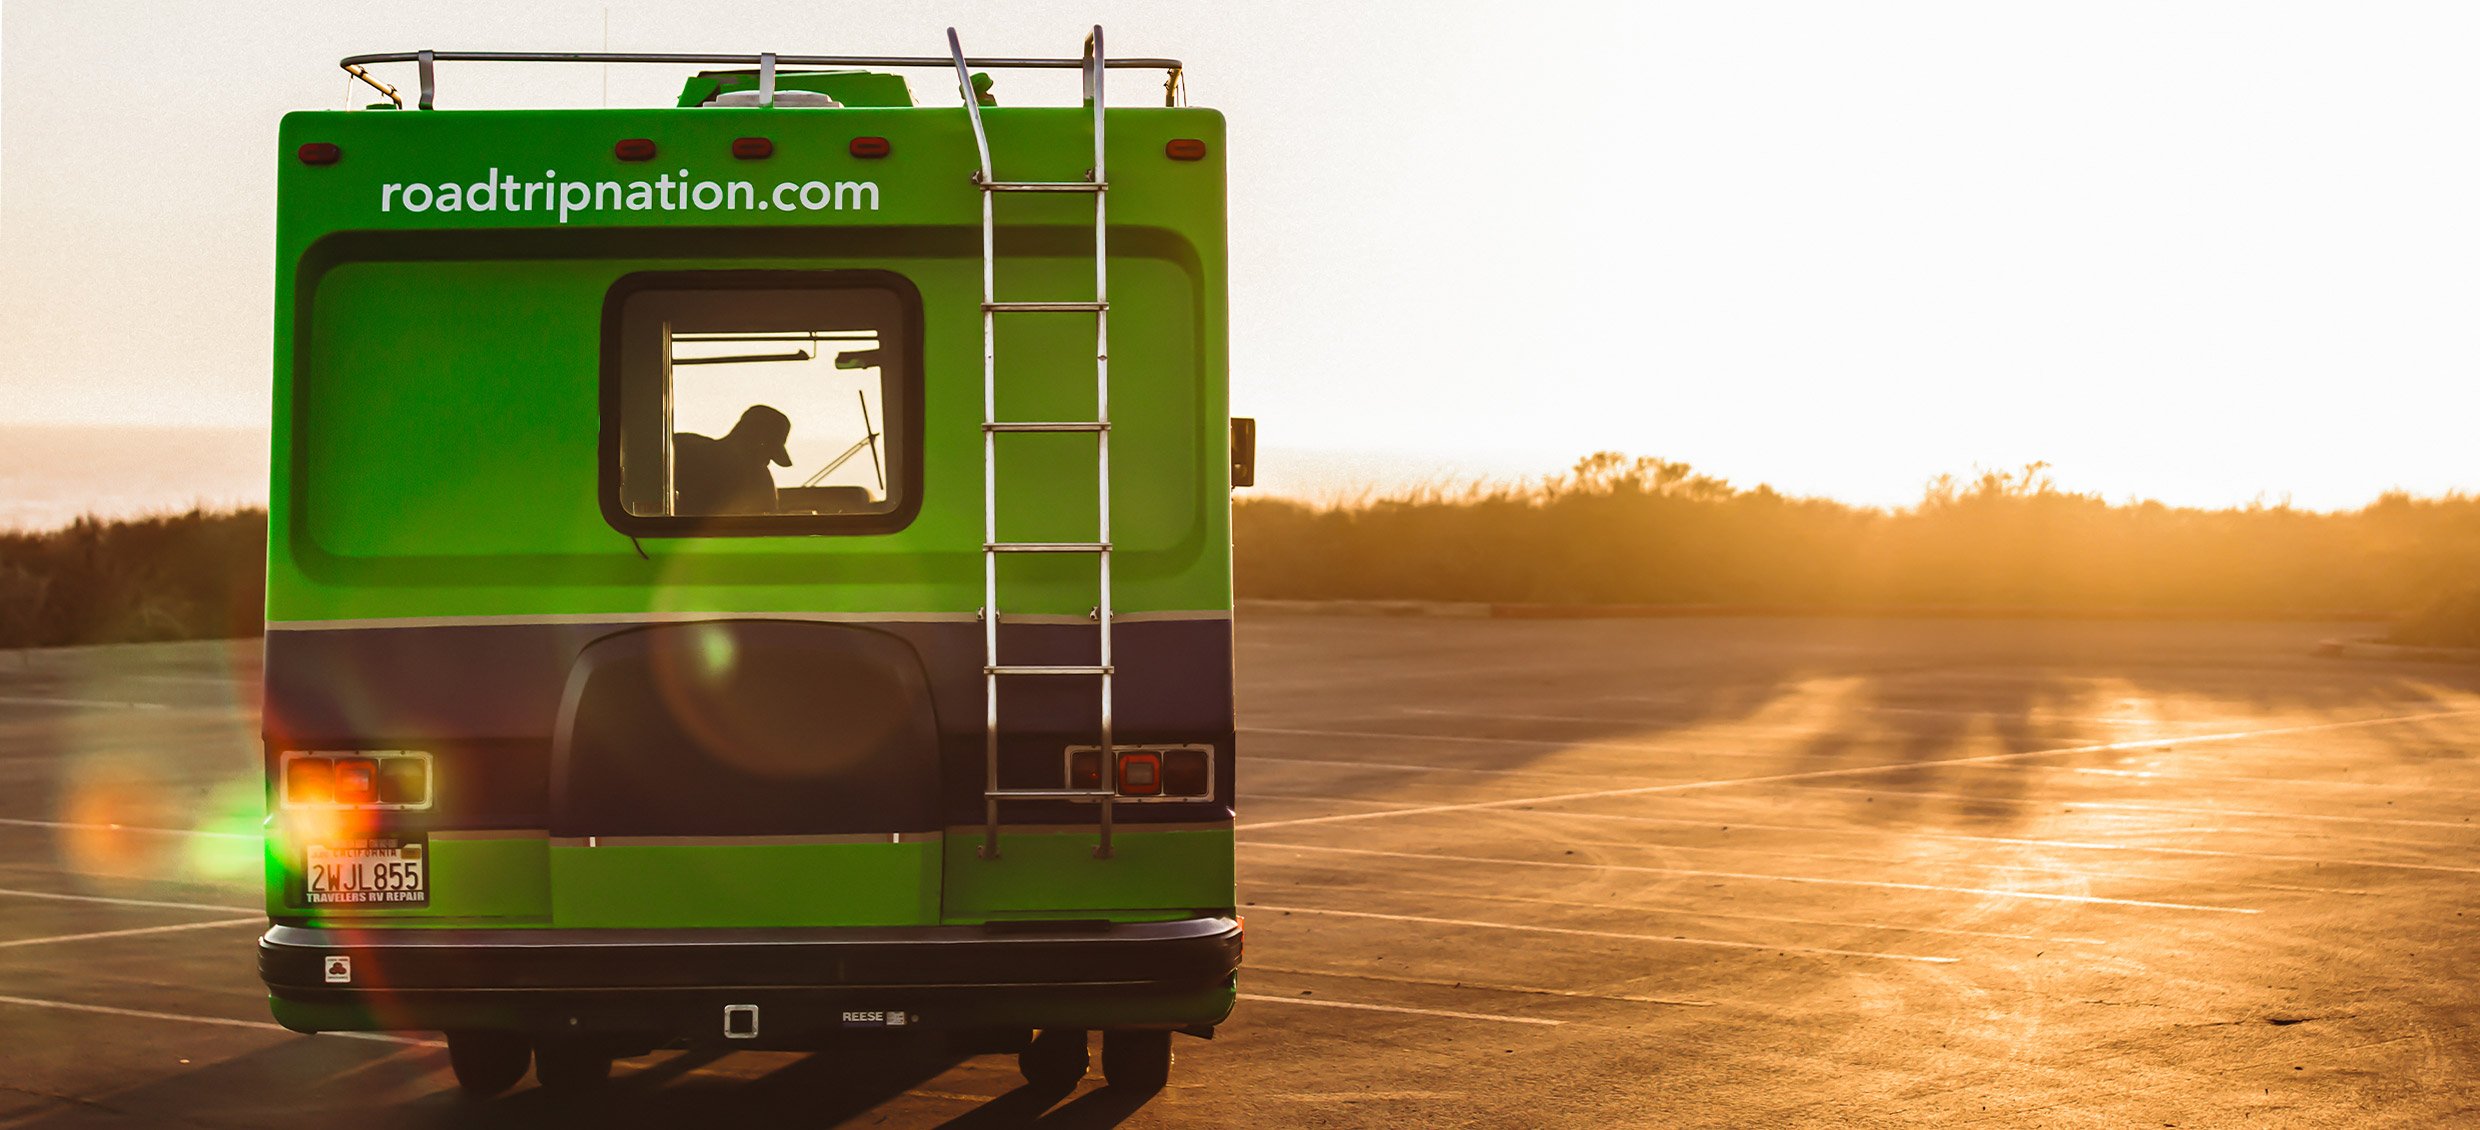 The Roadtrip Nation green RV parked in front of the sunset during golden hour.